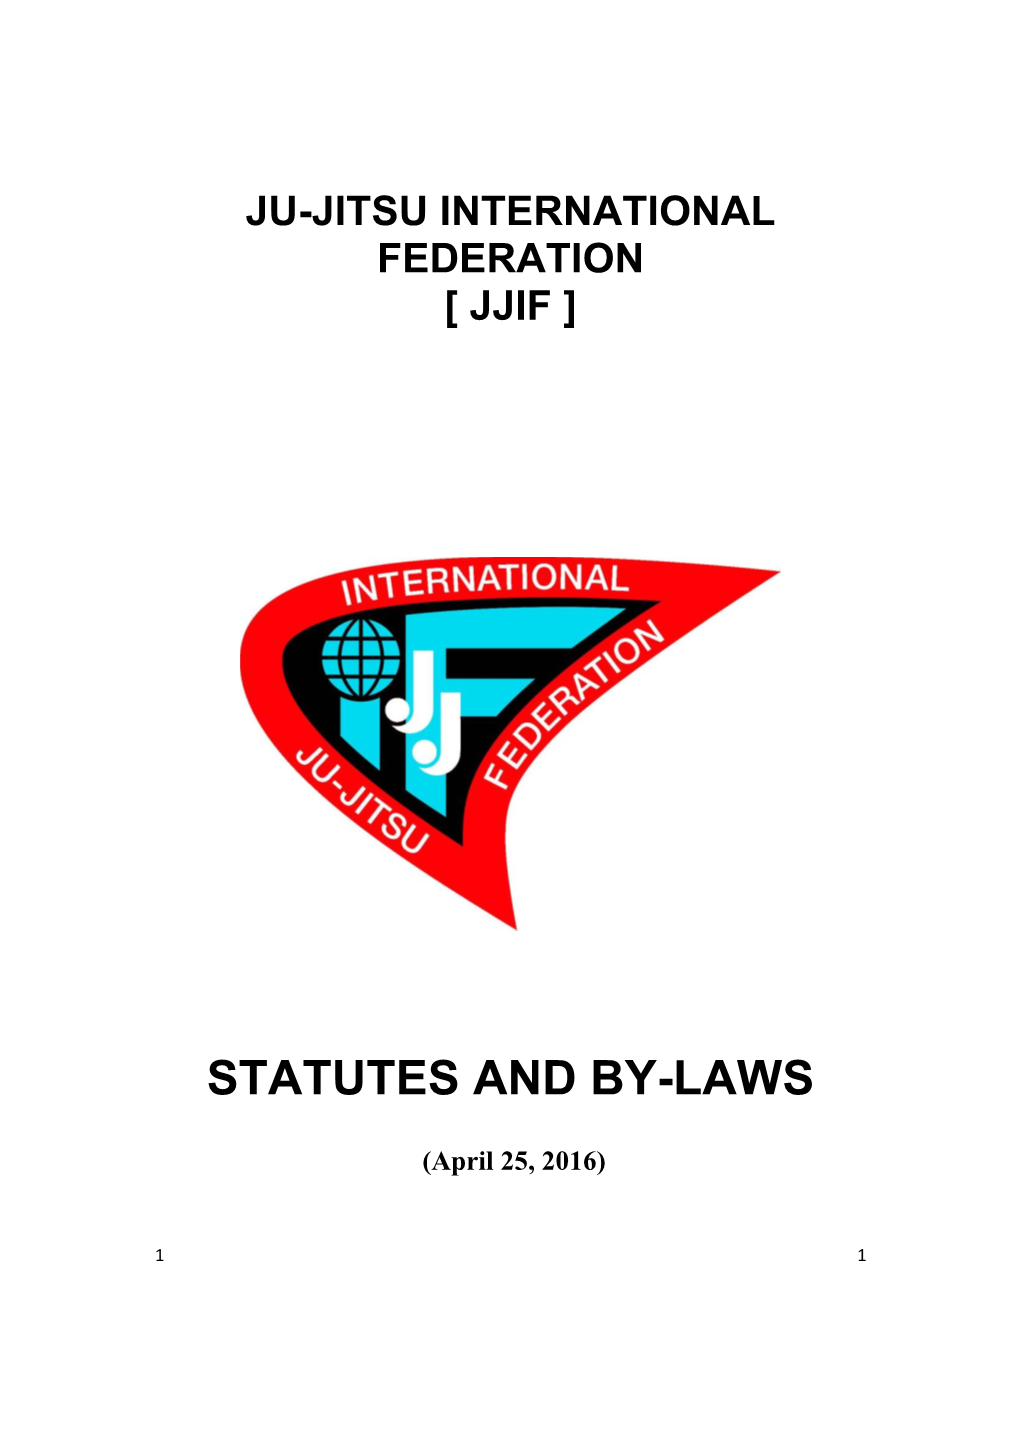 JJIF Statutes, Rules and Regulations and Are Organized Under the Control of JJNO’S Or Associations Recognized by the JJRIC